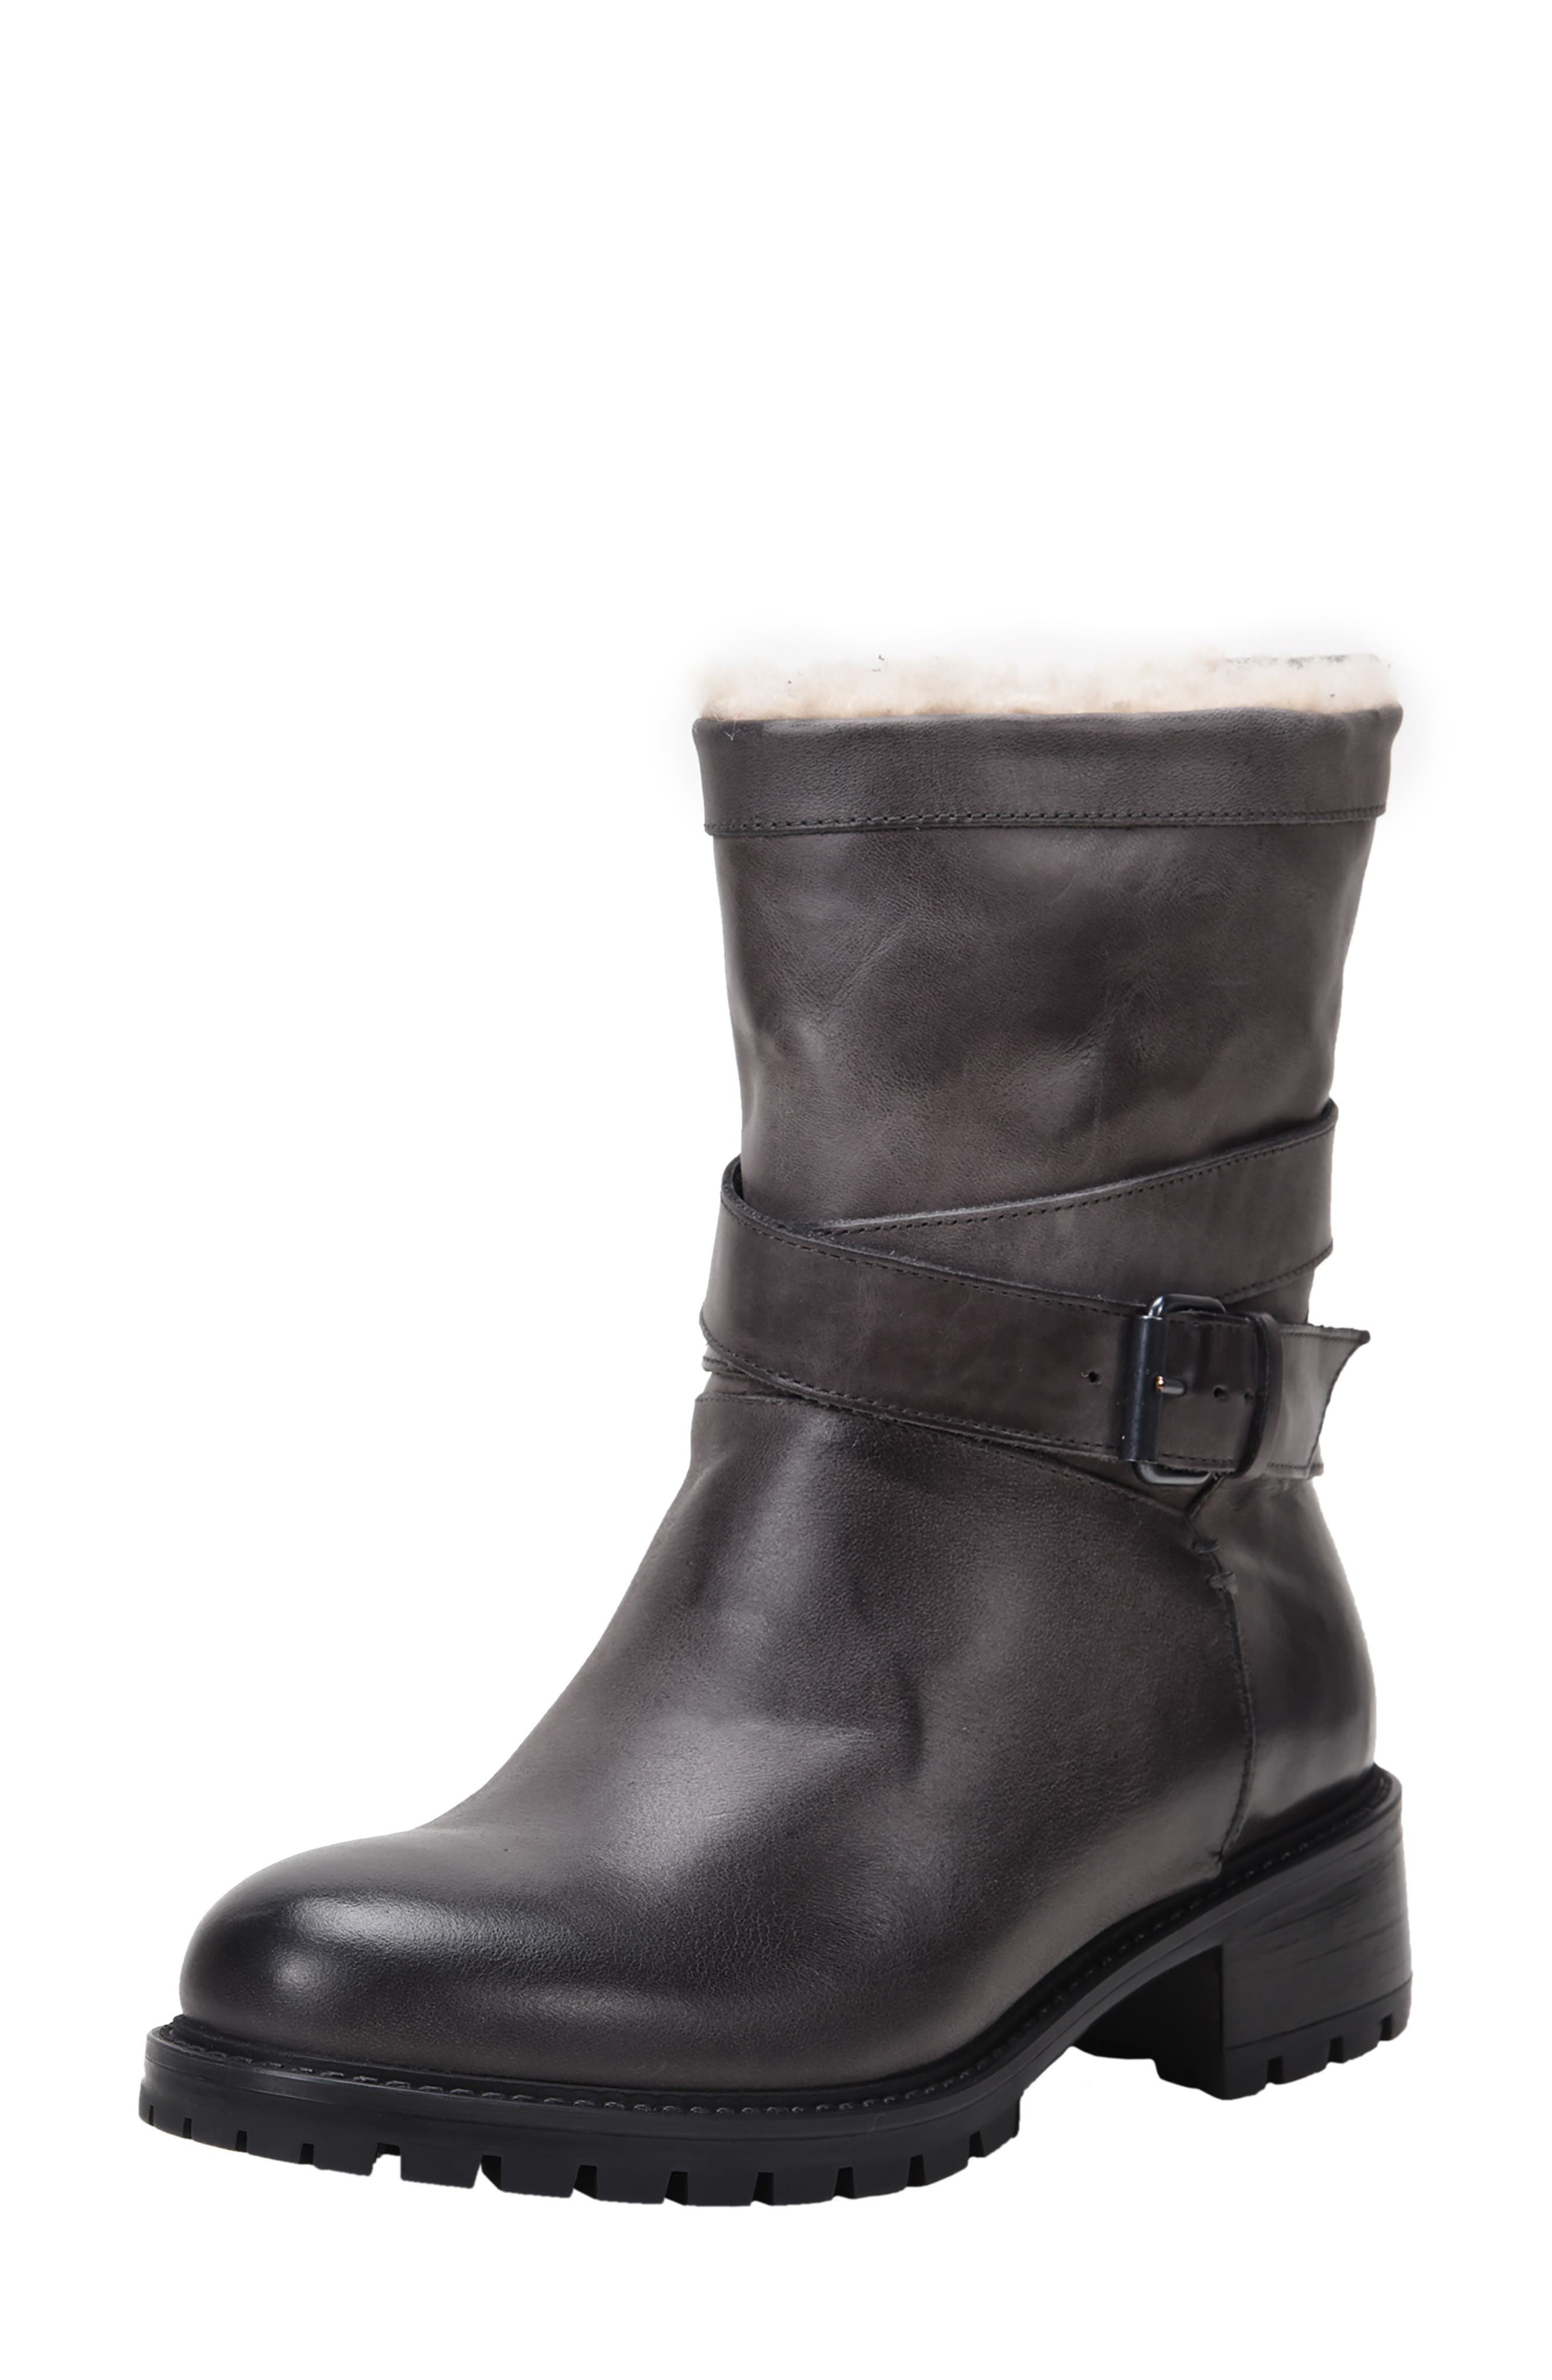 nordstrom womens winter boots